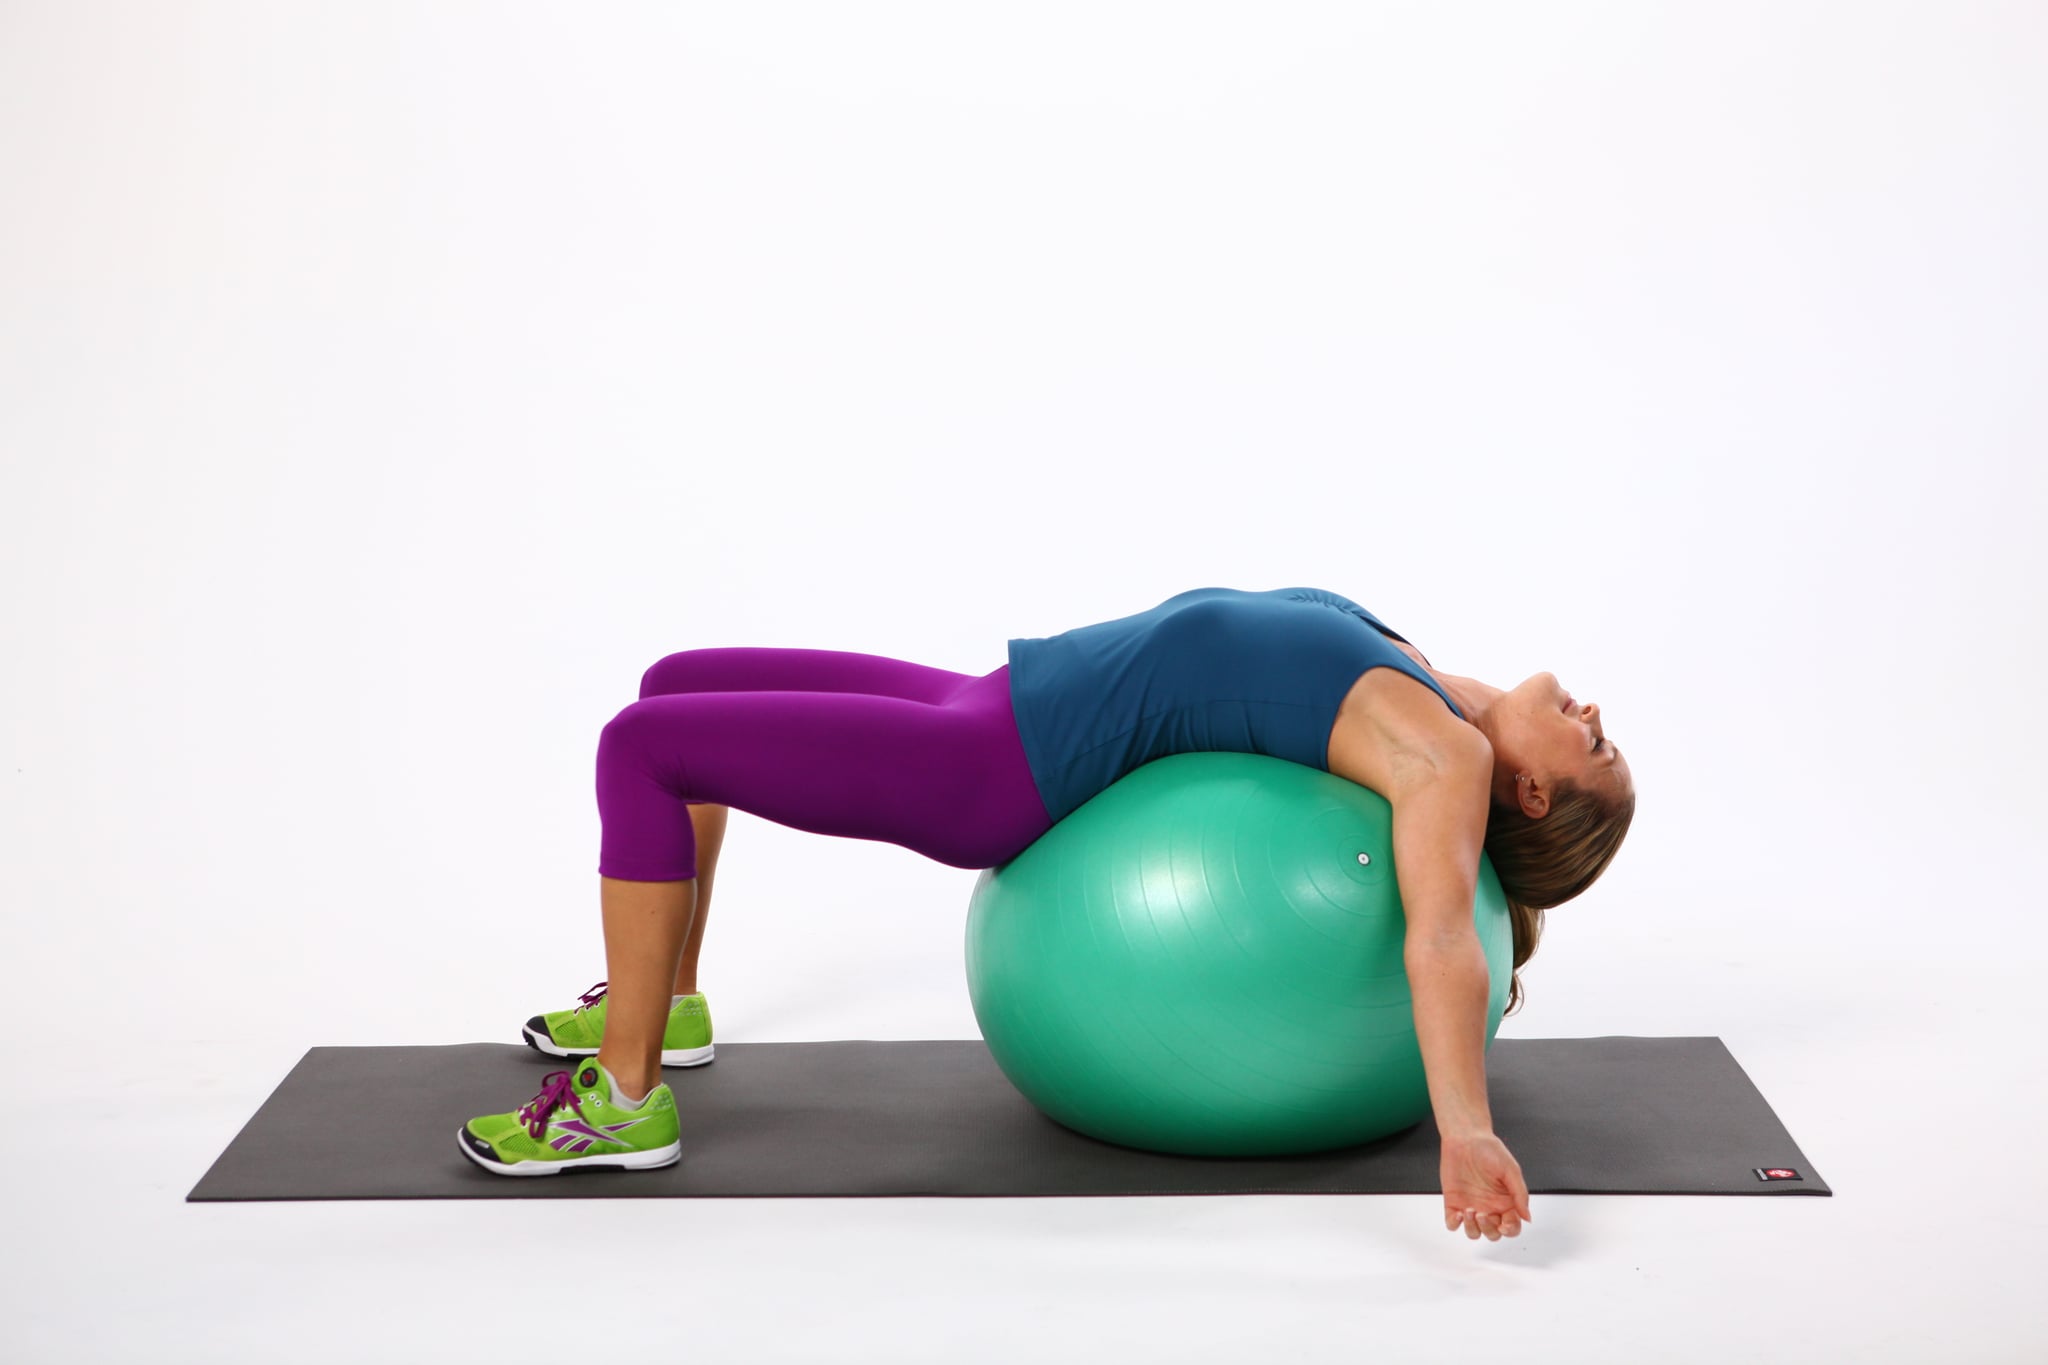 How to Stretch Your Back Using an Exercise Ball | POPSUGAR Fitness